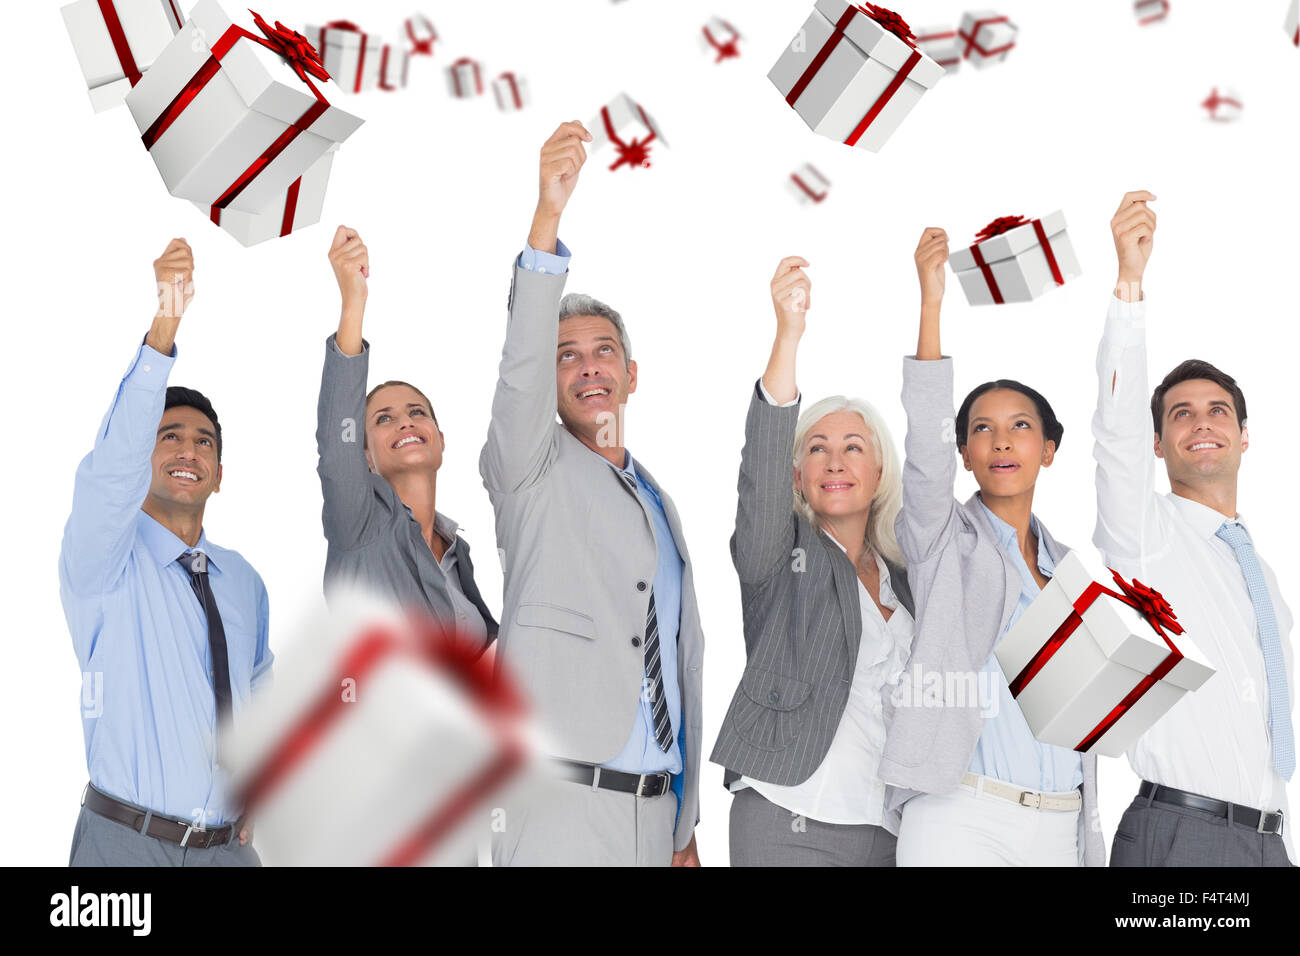 Composite image of smiling business people raising hands Stock Photo